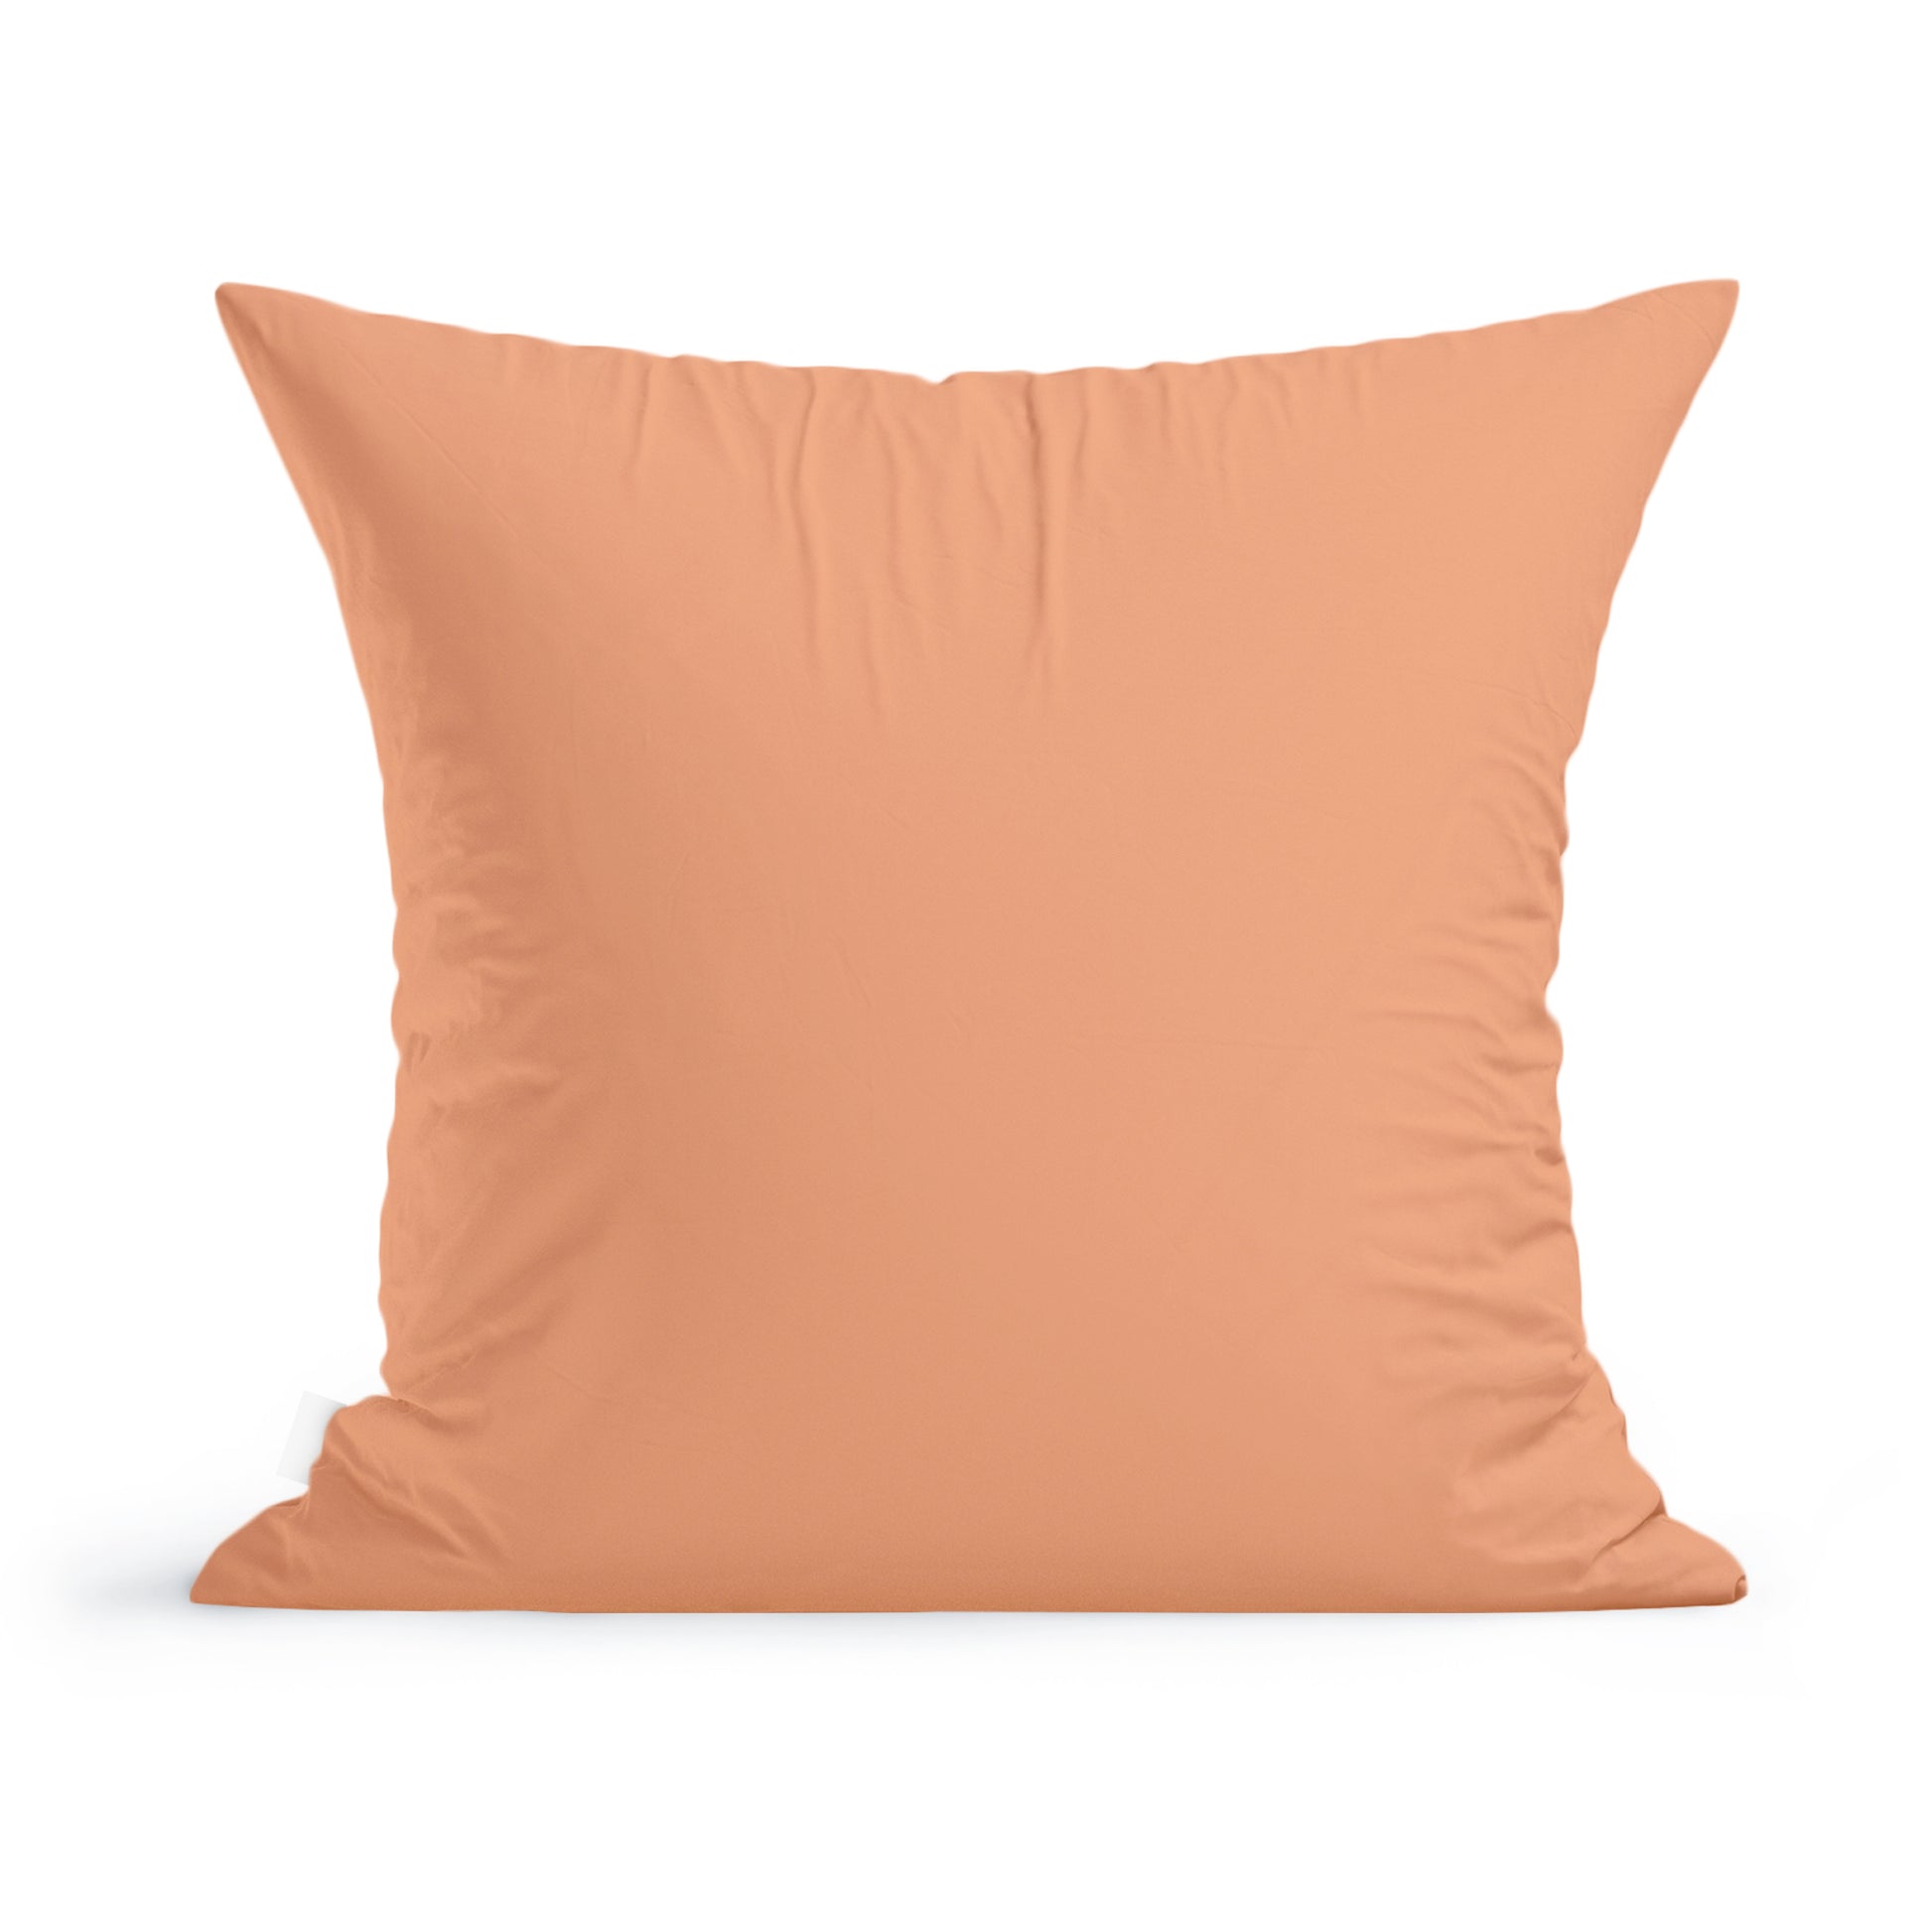 A plain peach-colored square Sunflowers Pillow by Rustic County on a living room sofa.